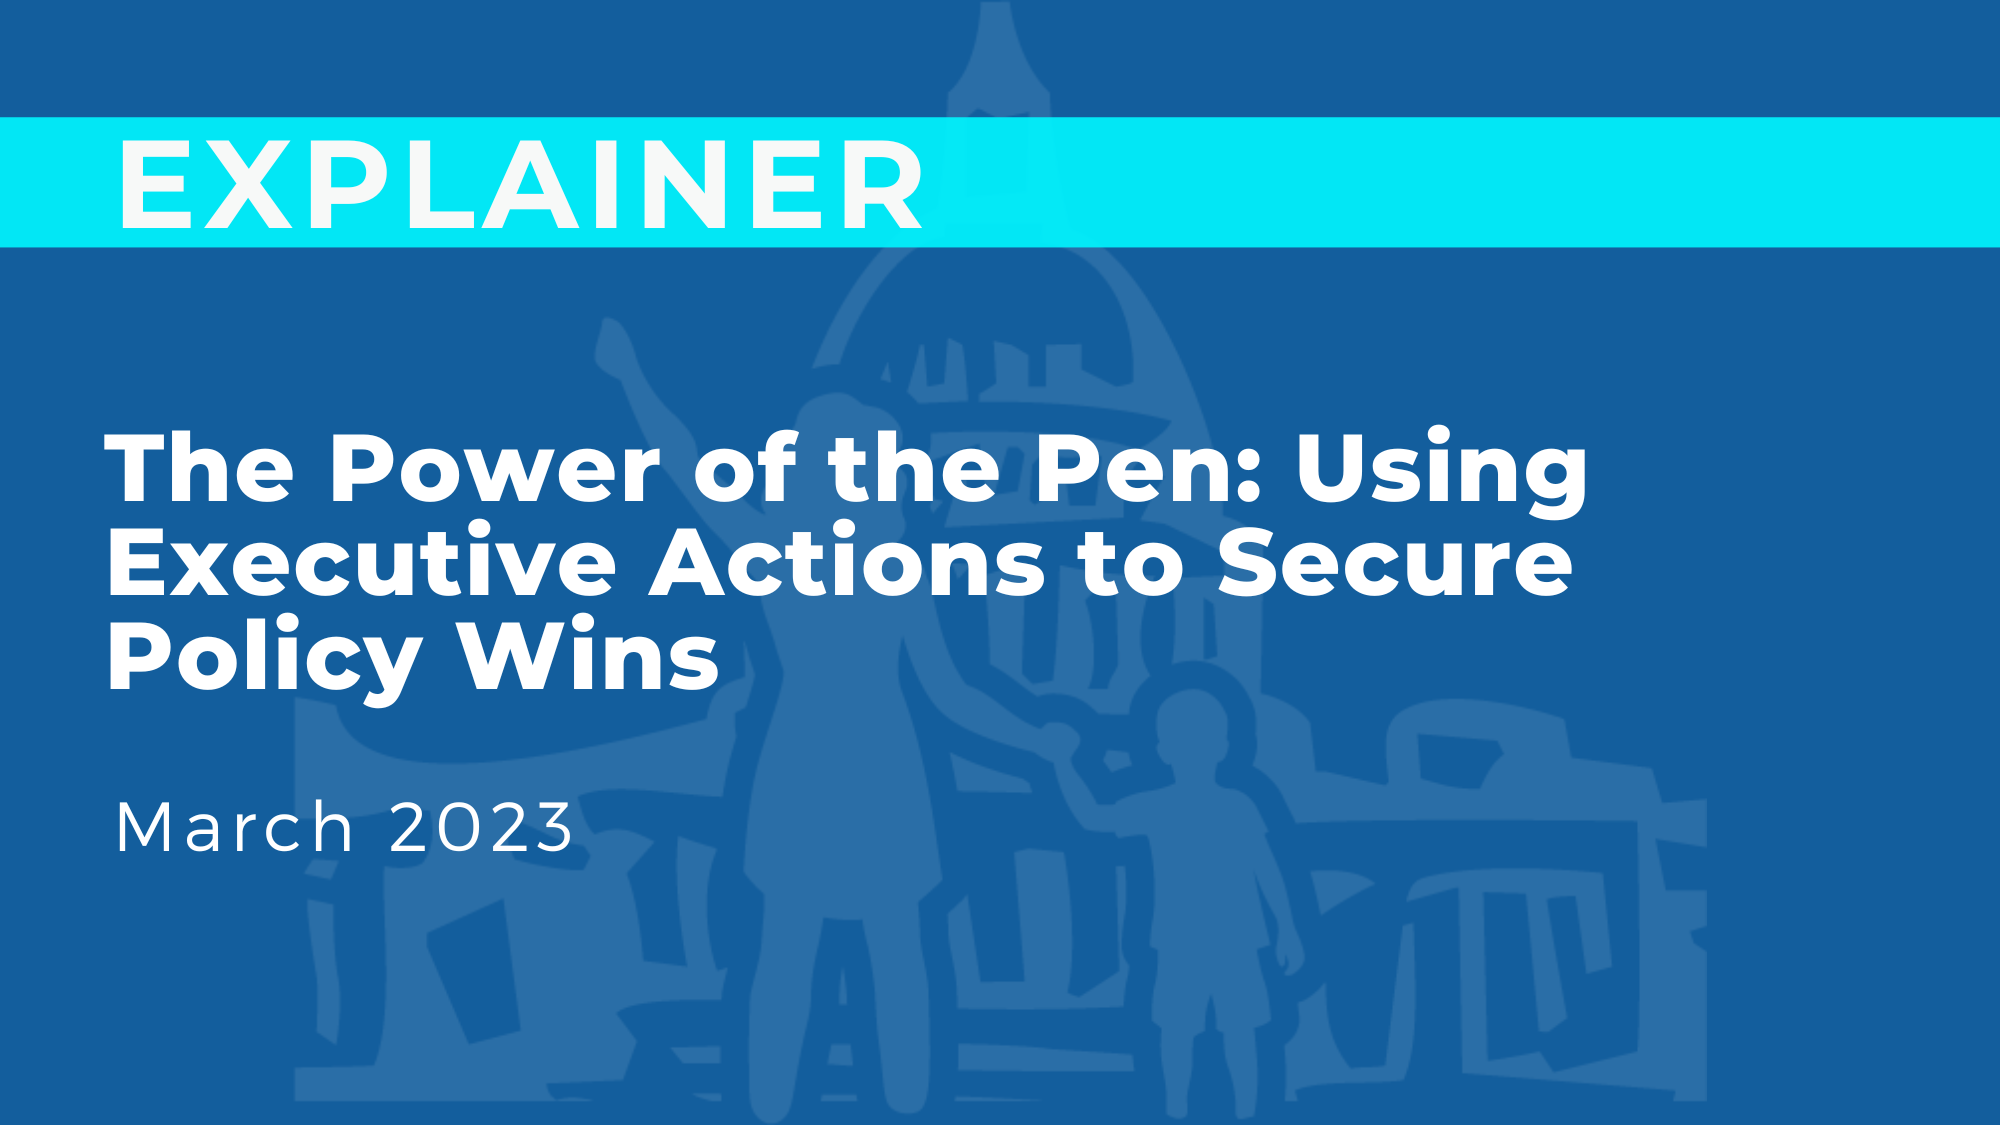 The Power of the Pen: Using Executive Actions to Deliver Policy Wins